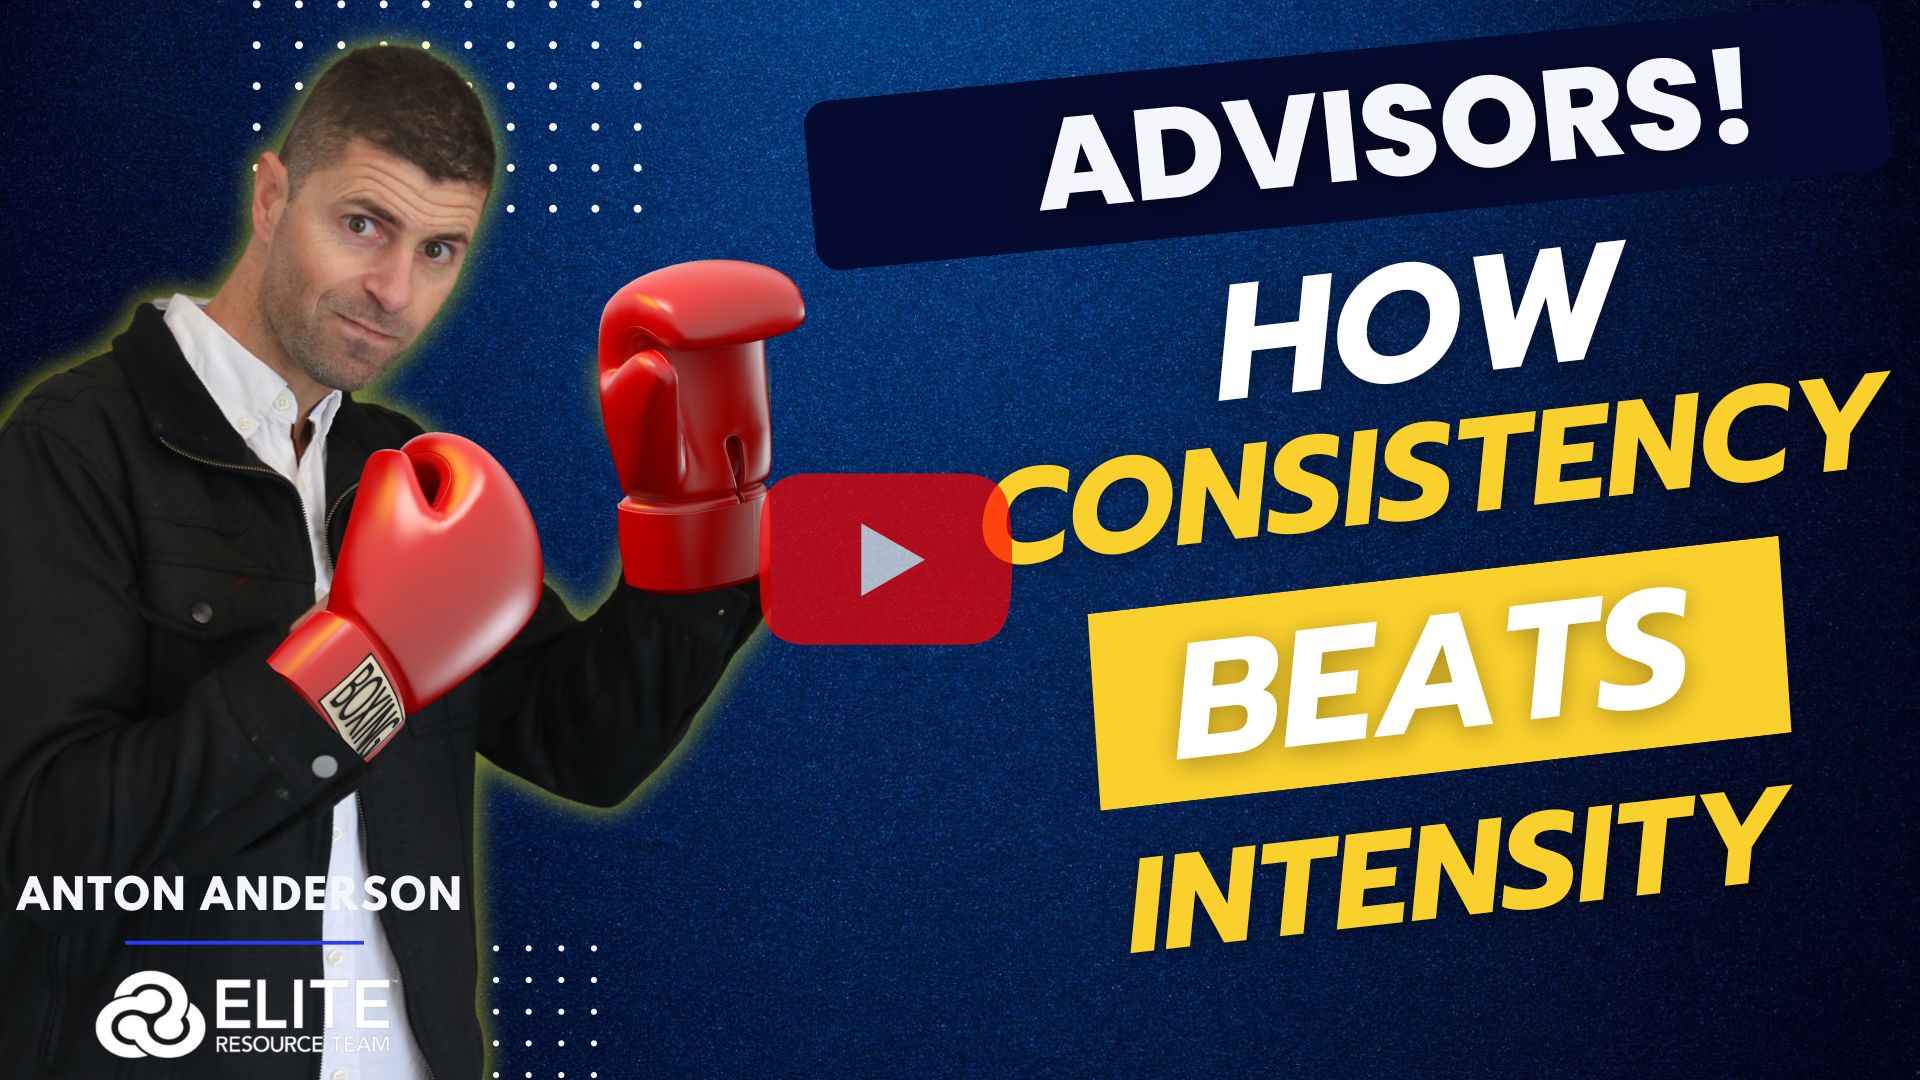 Why Consistency Beats Intensity for Advisors Trying To Partner with CPAs